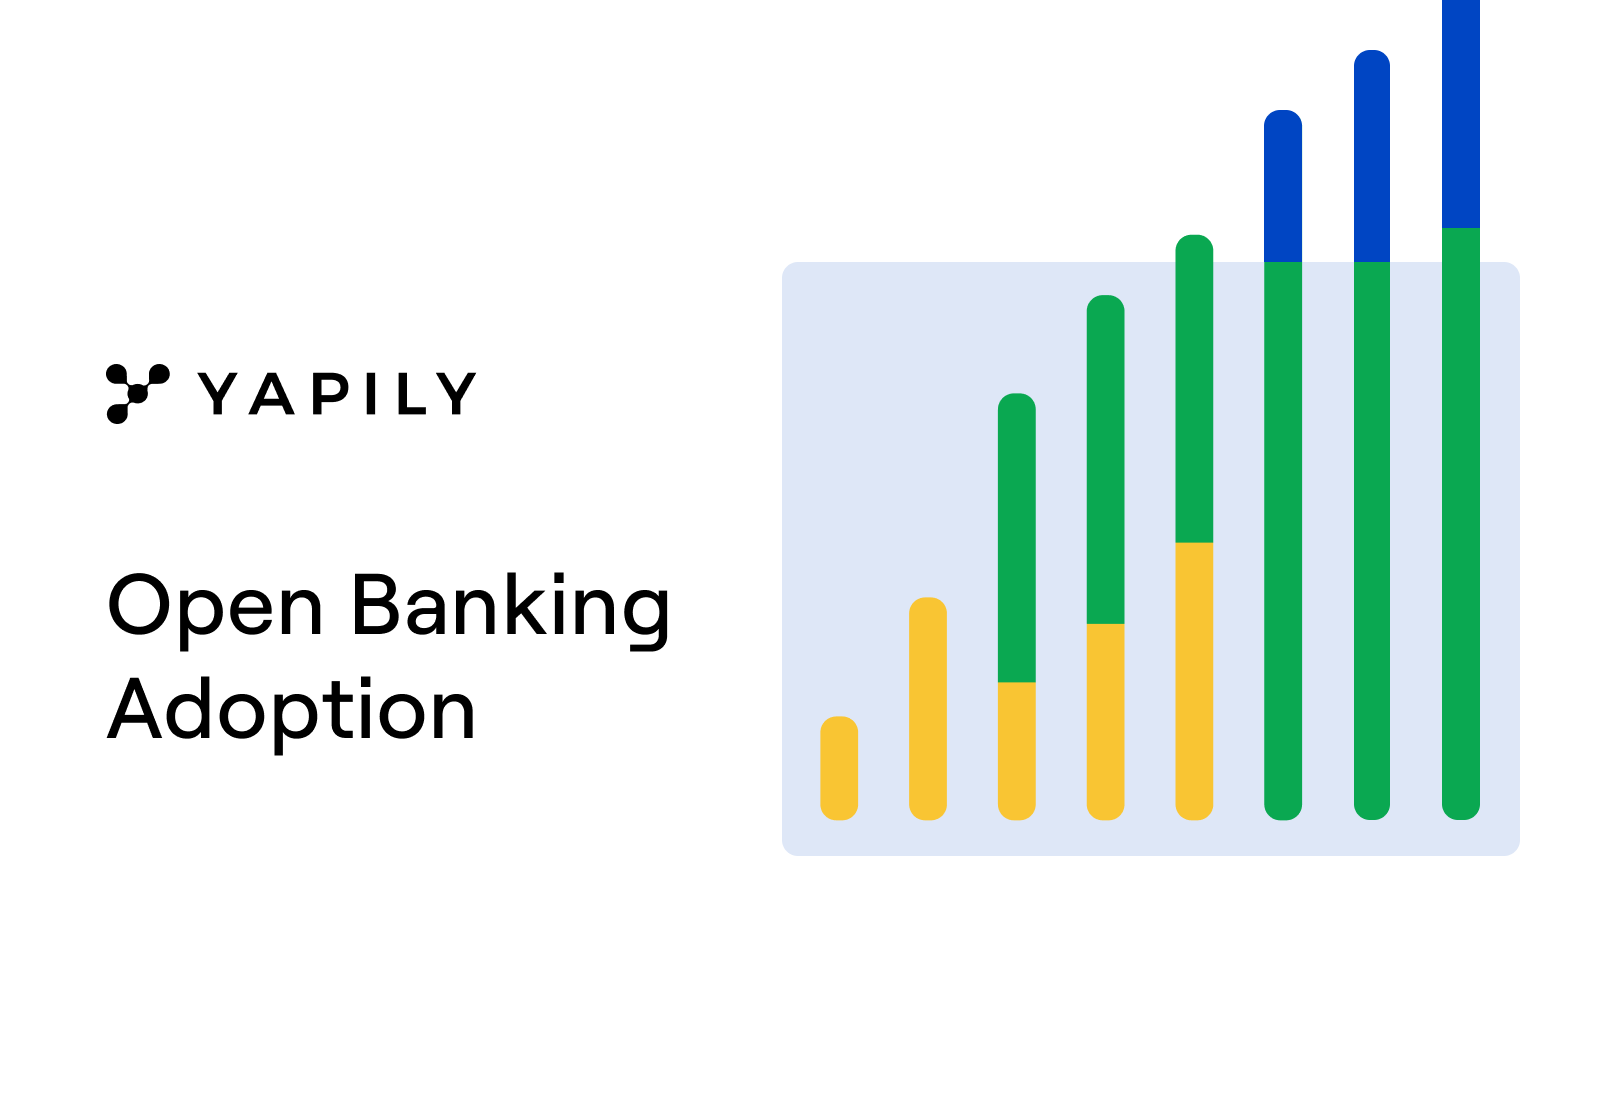 New data, released by Yapily, the leading Open Banking infrastructure provider, finds all of the UK’s major retail banks have made significant improvements in Open Banking API response times over the last 12 months since Q1 2020. 